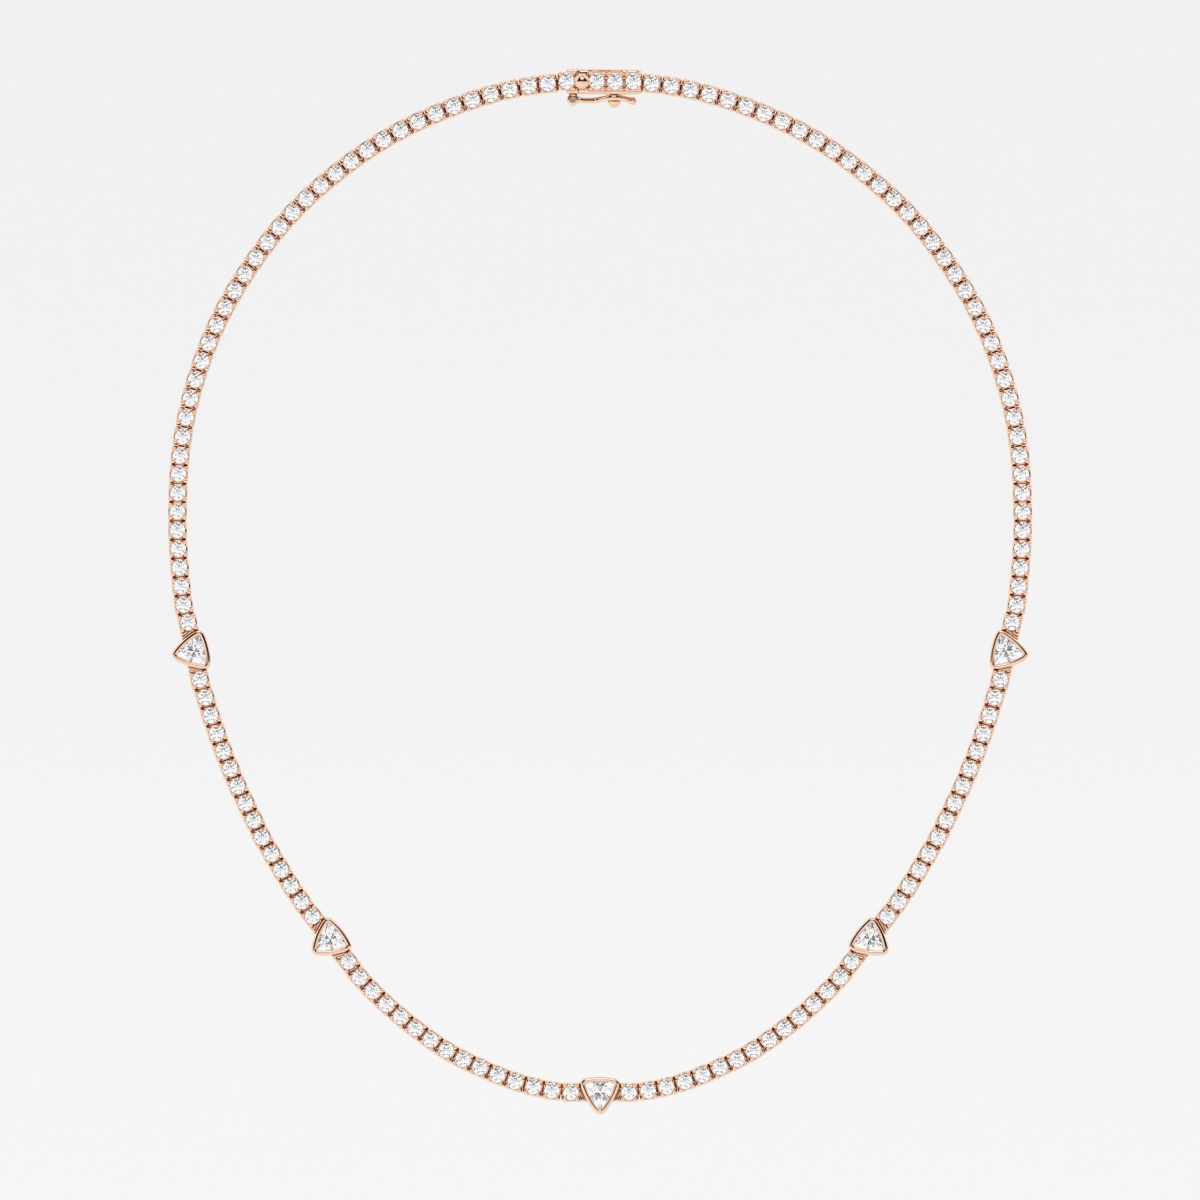 Additional Image 1 for  näas Empowering 8 3/4 ctw Trillion Lab Grown Diamond Station Tennis Necklace